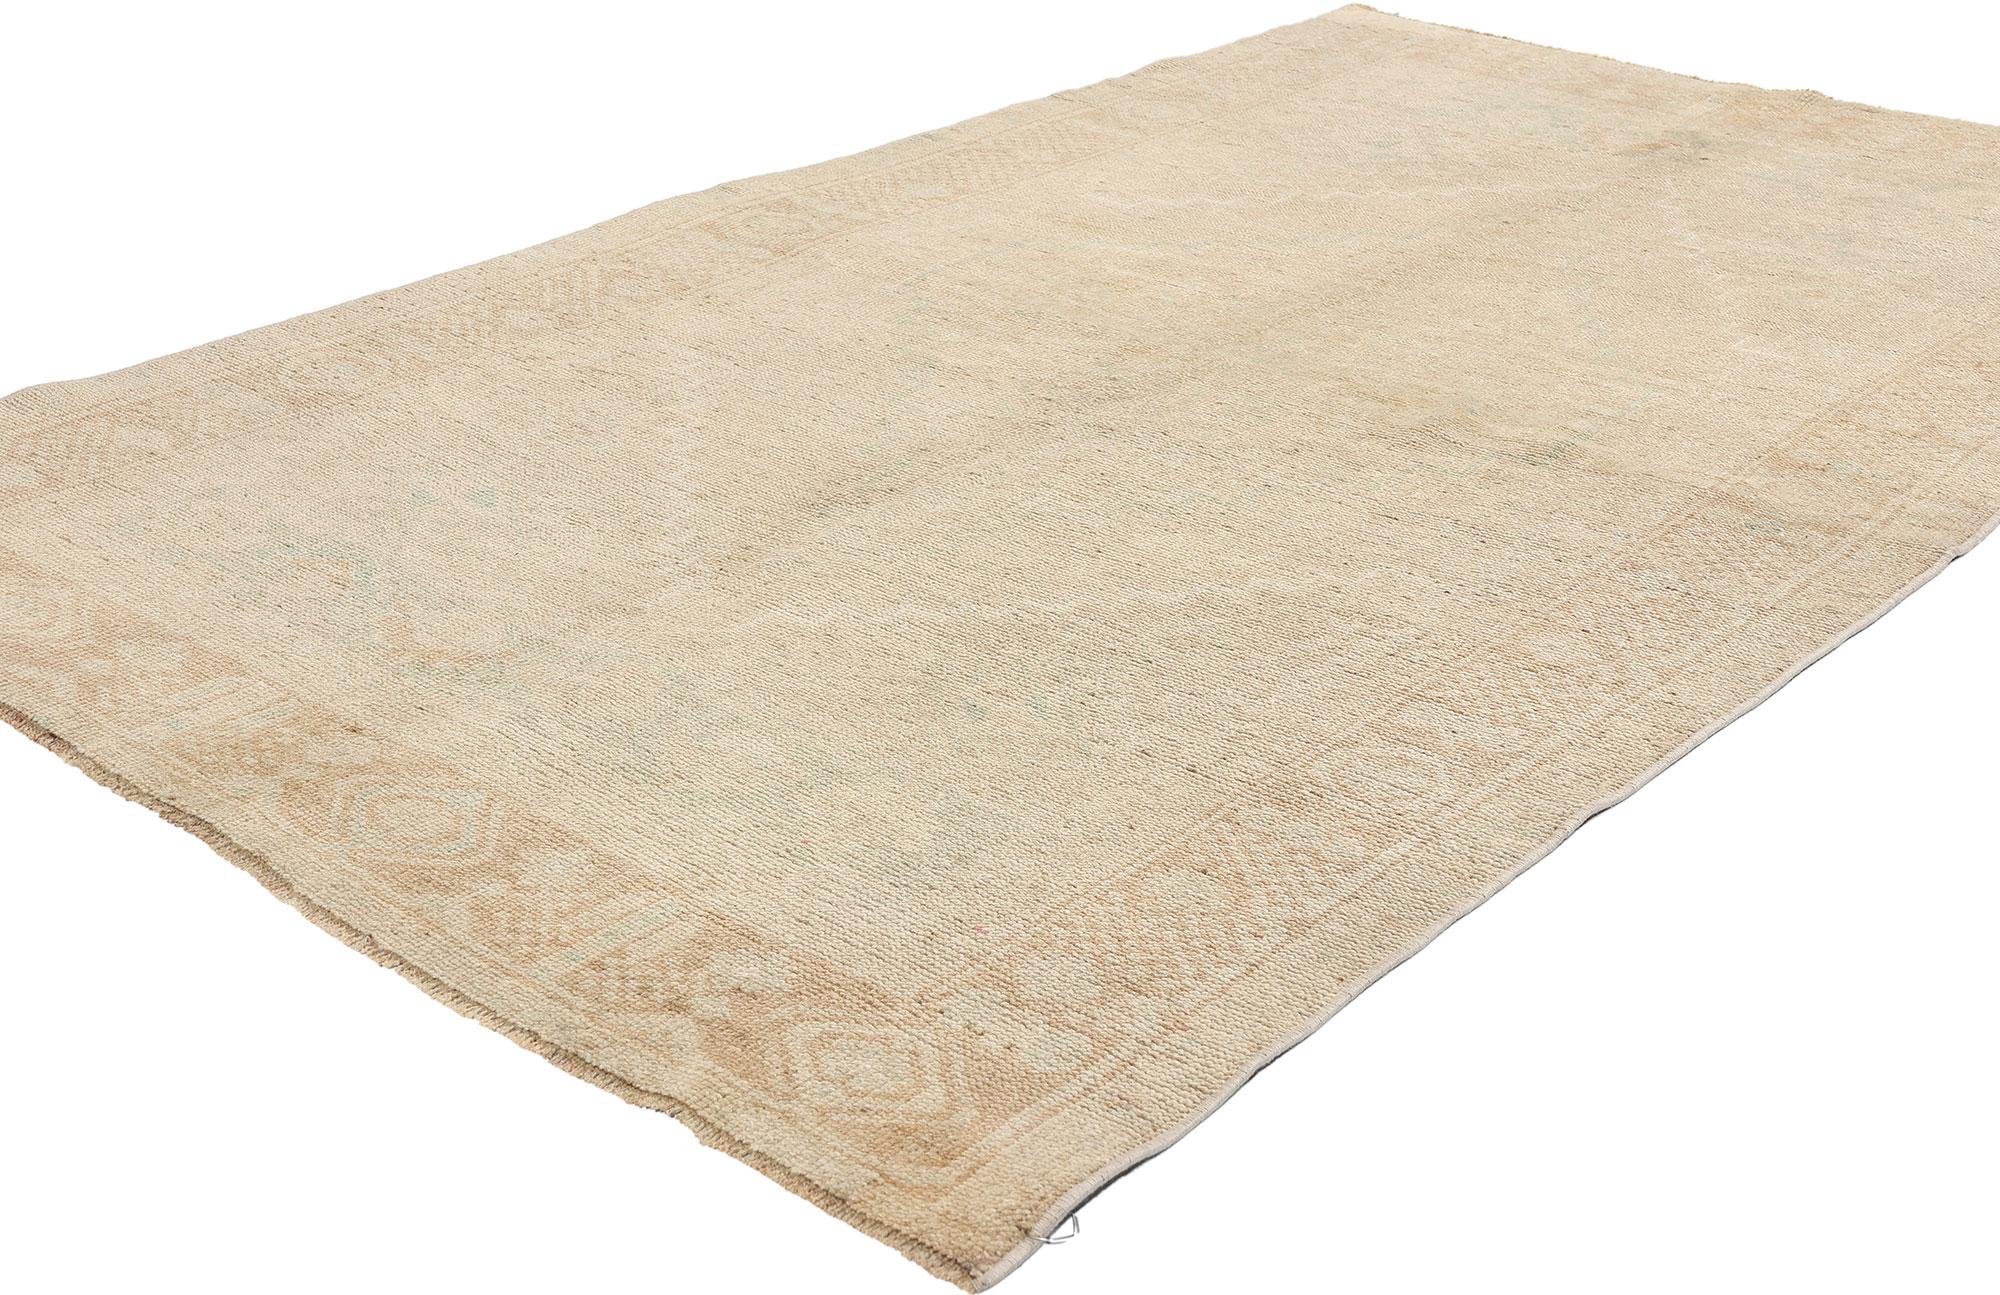 53690 Vintage Turkish Oushak Rug 04'00 x 07'00. Hailing from Turkey's Oushak region, muted antique-washed Turkish Oushak rugs are celebrated for their intricate handwoven craftsmanship, featuring understated patterns and a seamless blend of